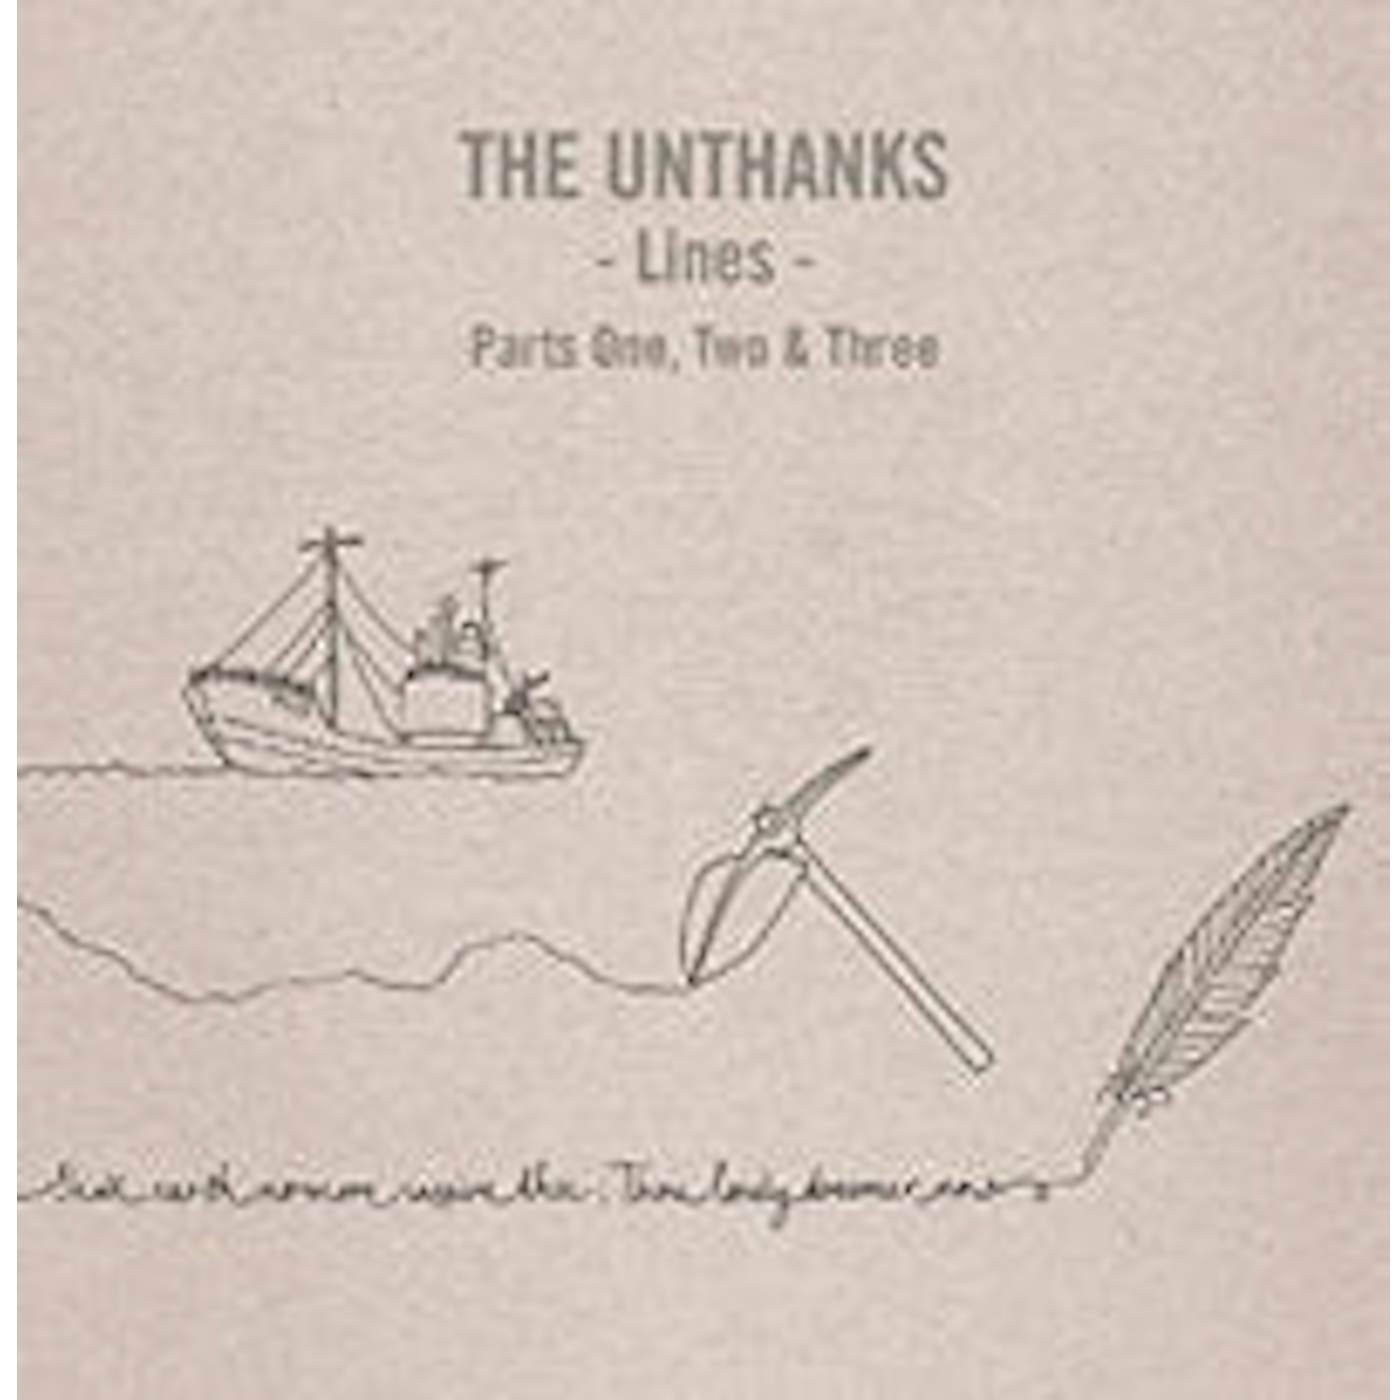 The Unthanks LP - Lines - Parts One, Two And Three (3 X 10 Inch Lp) (Vinyl)